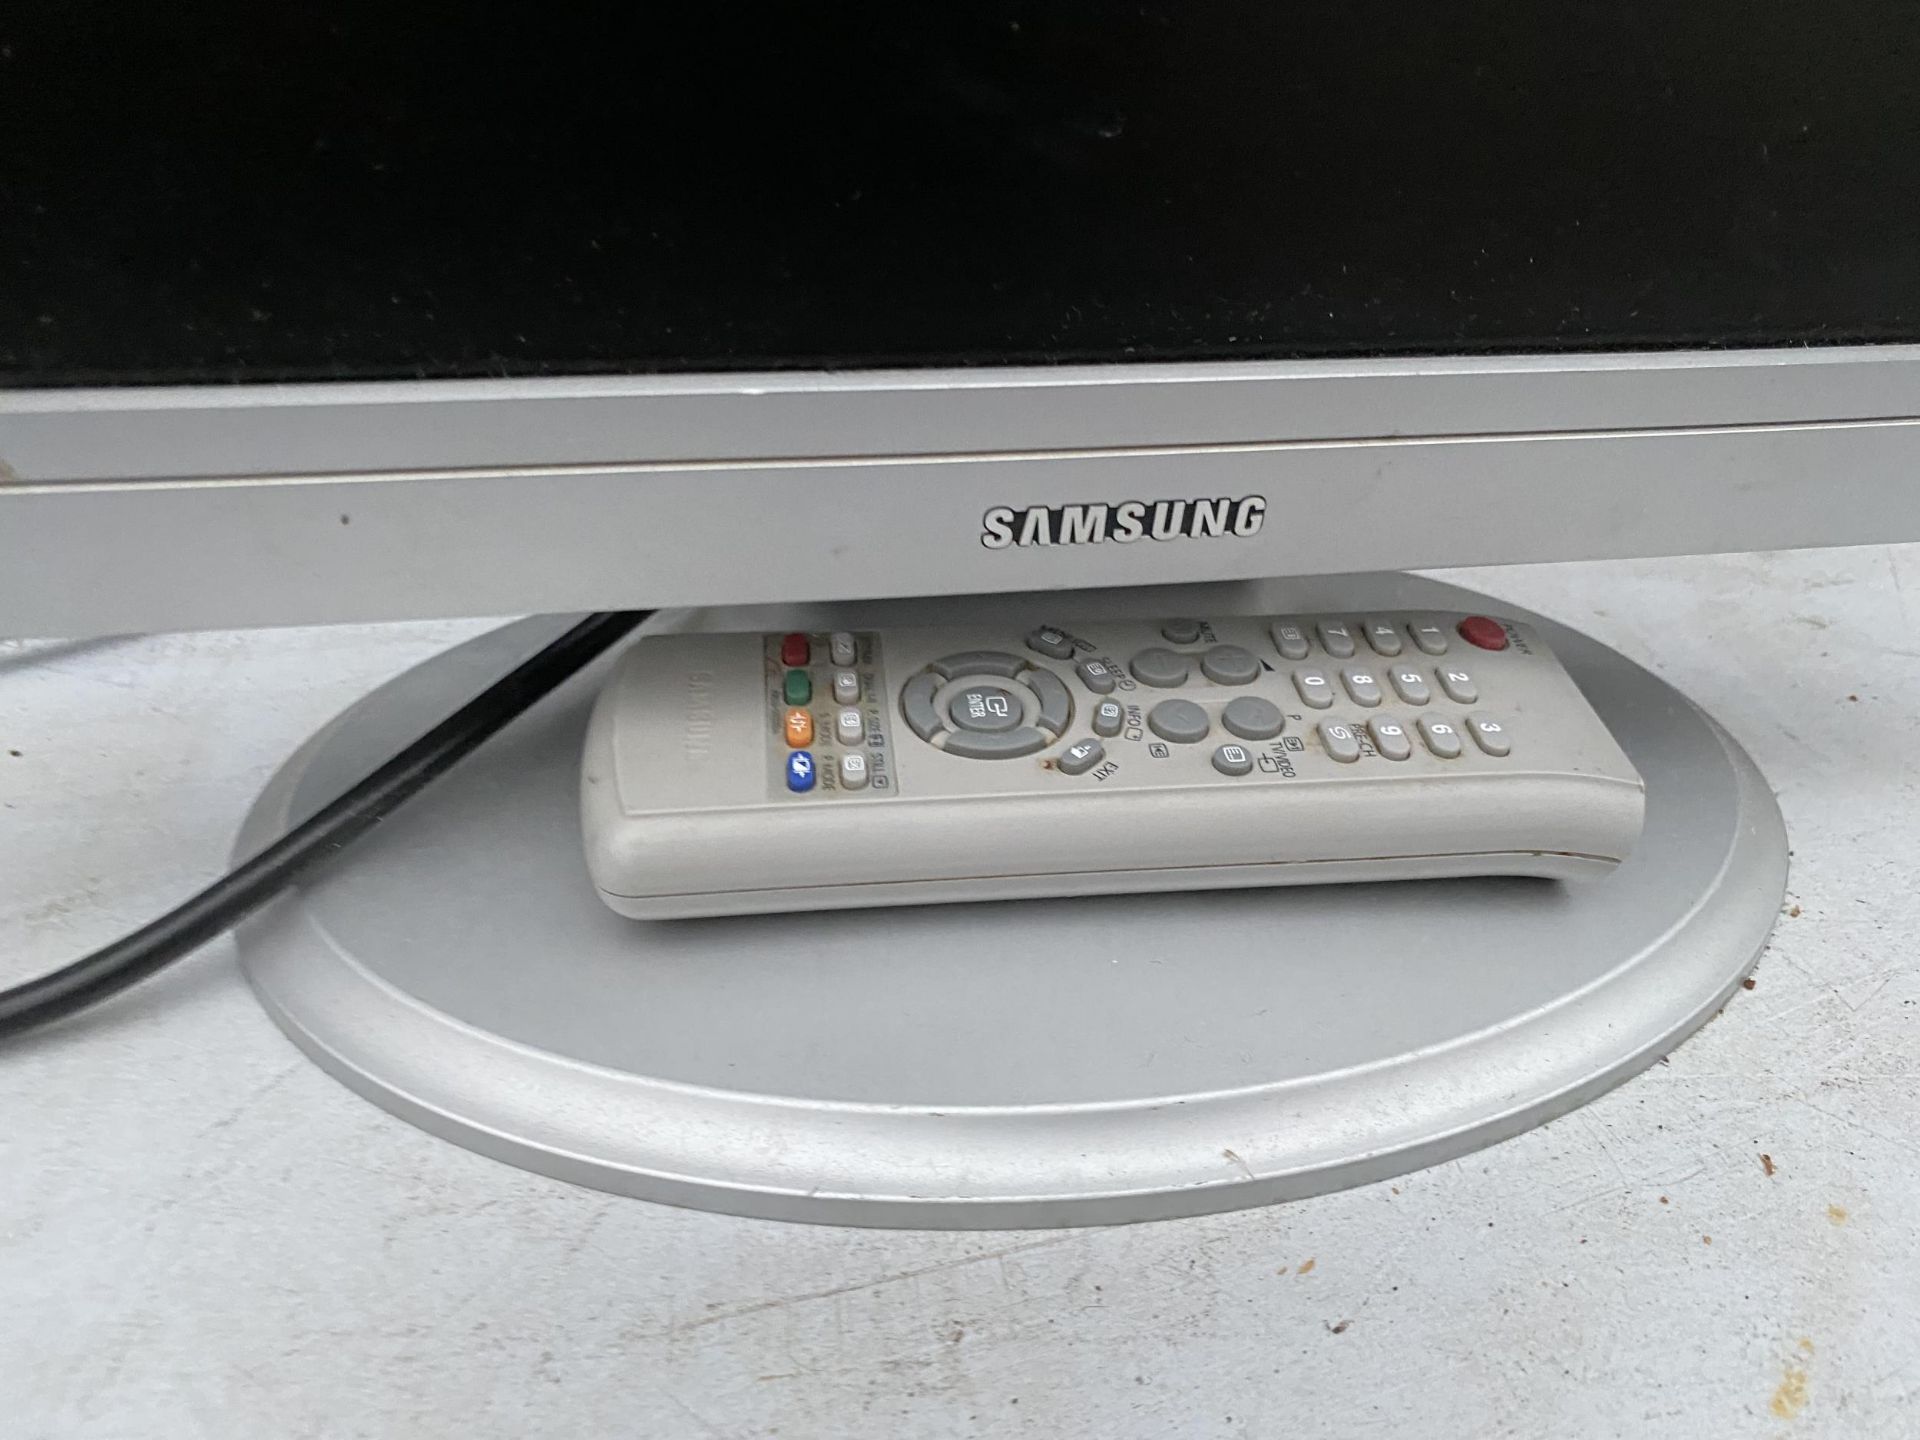 A SAMSUNG 15" TELEVISION WITH REMOTE CONTROL - Image 2 of 2